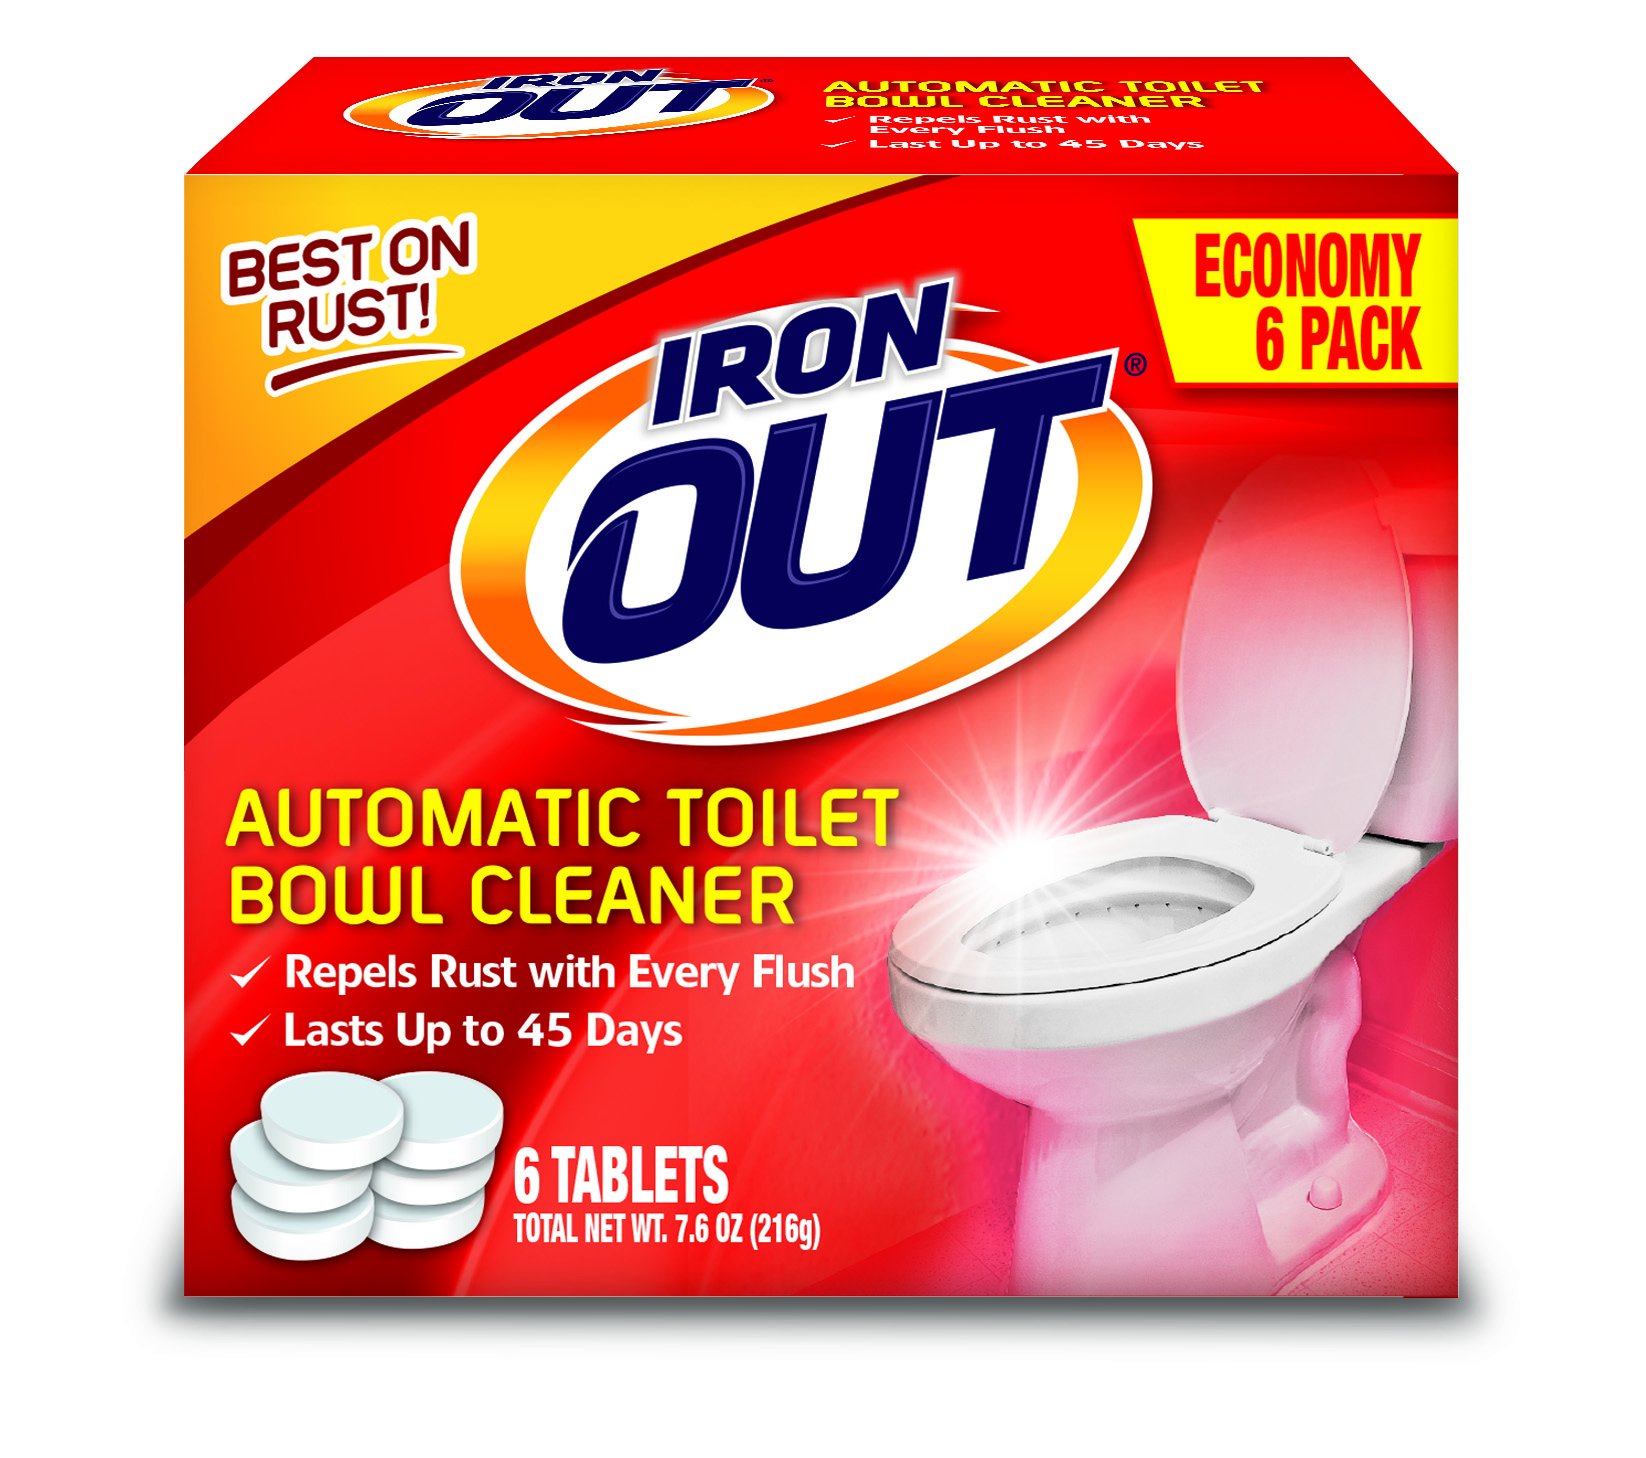 Iron OUT Automatic Toilet Bowl Cleaner